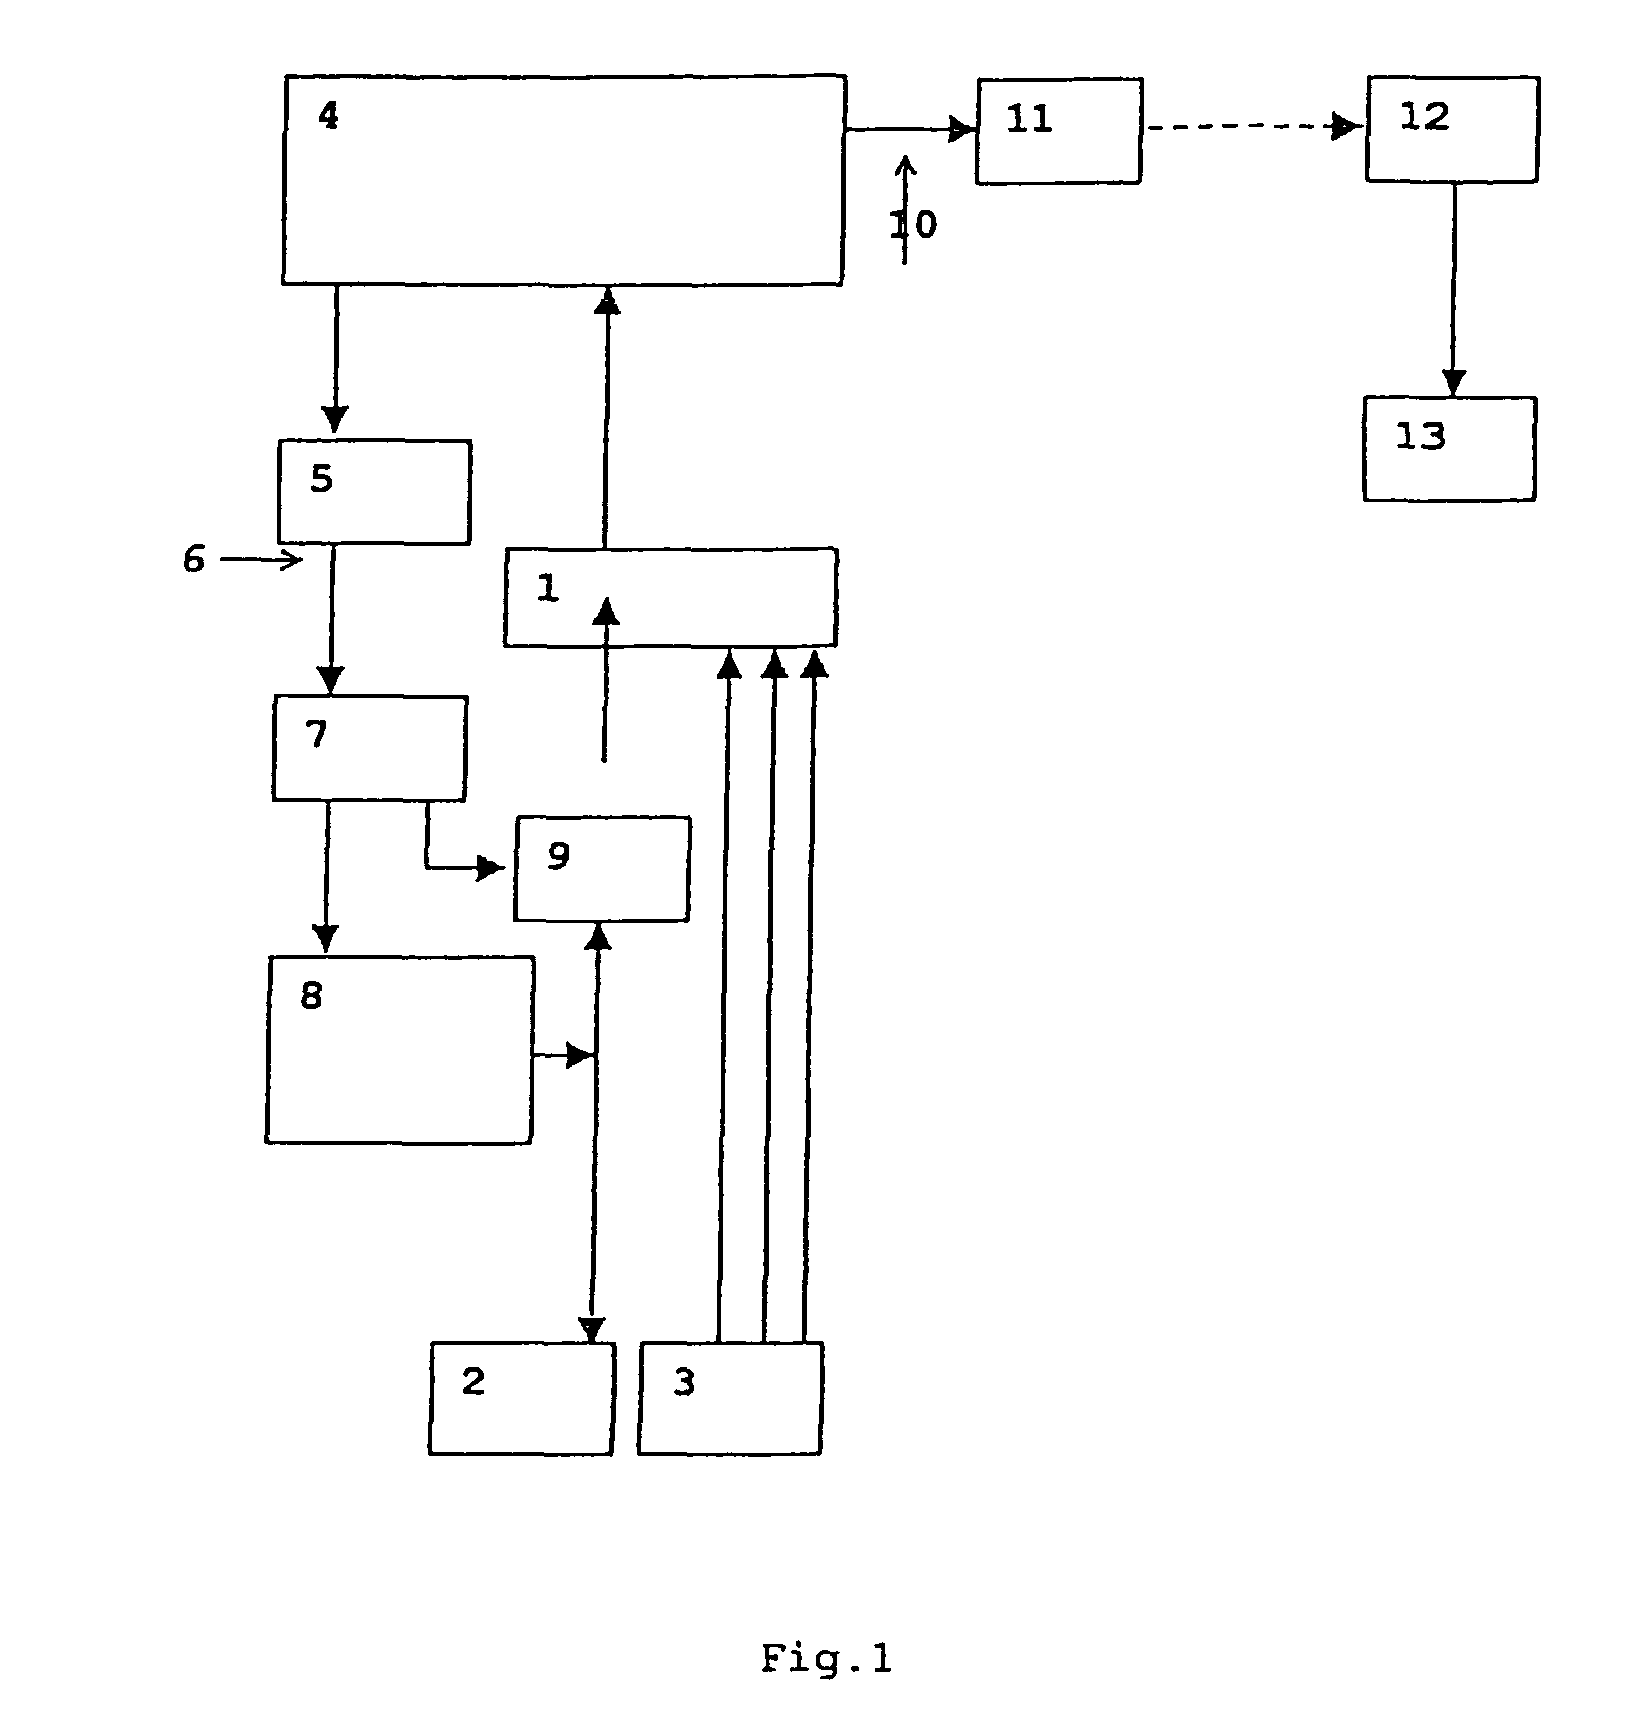 Method and apparatus for desynchronization of neural brain activity